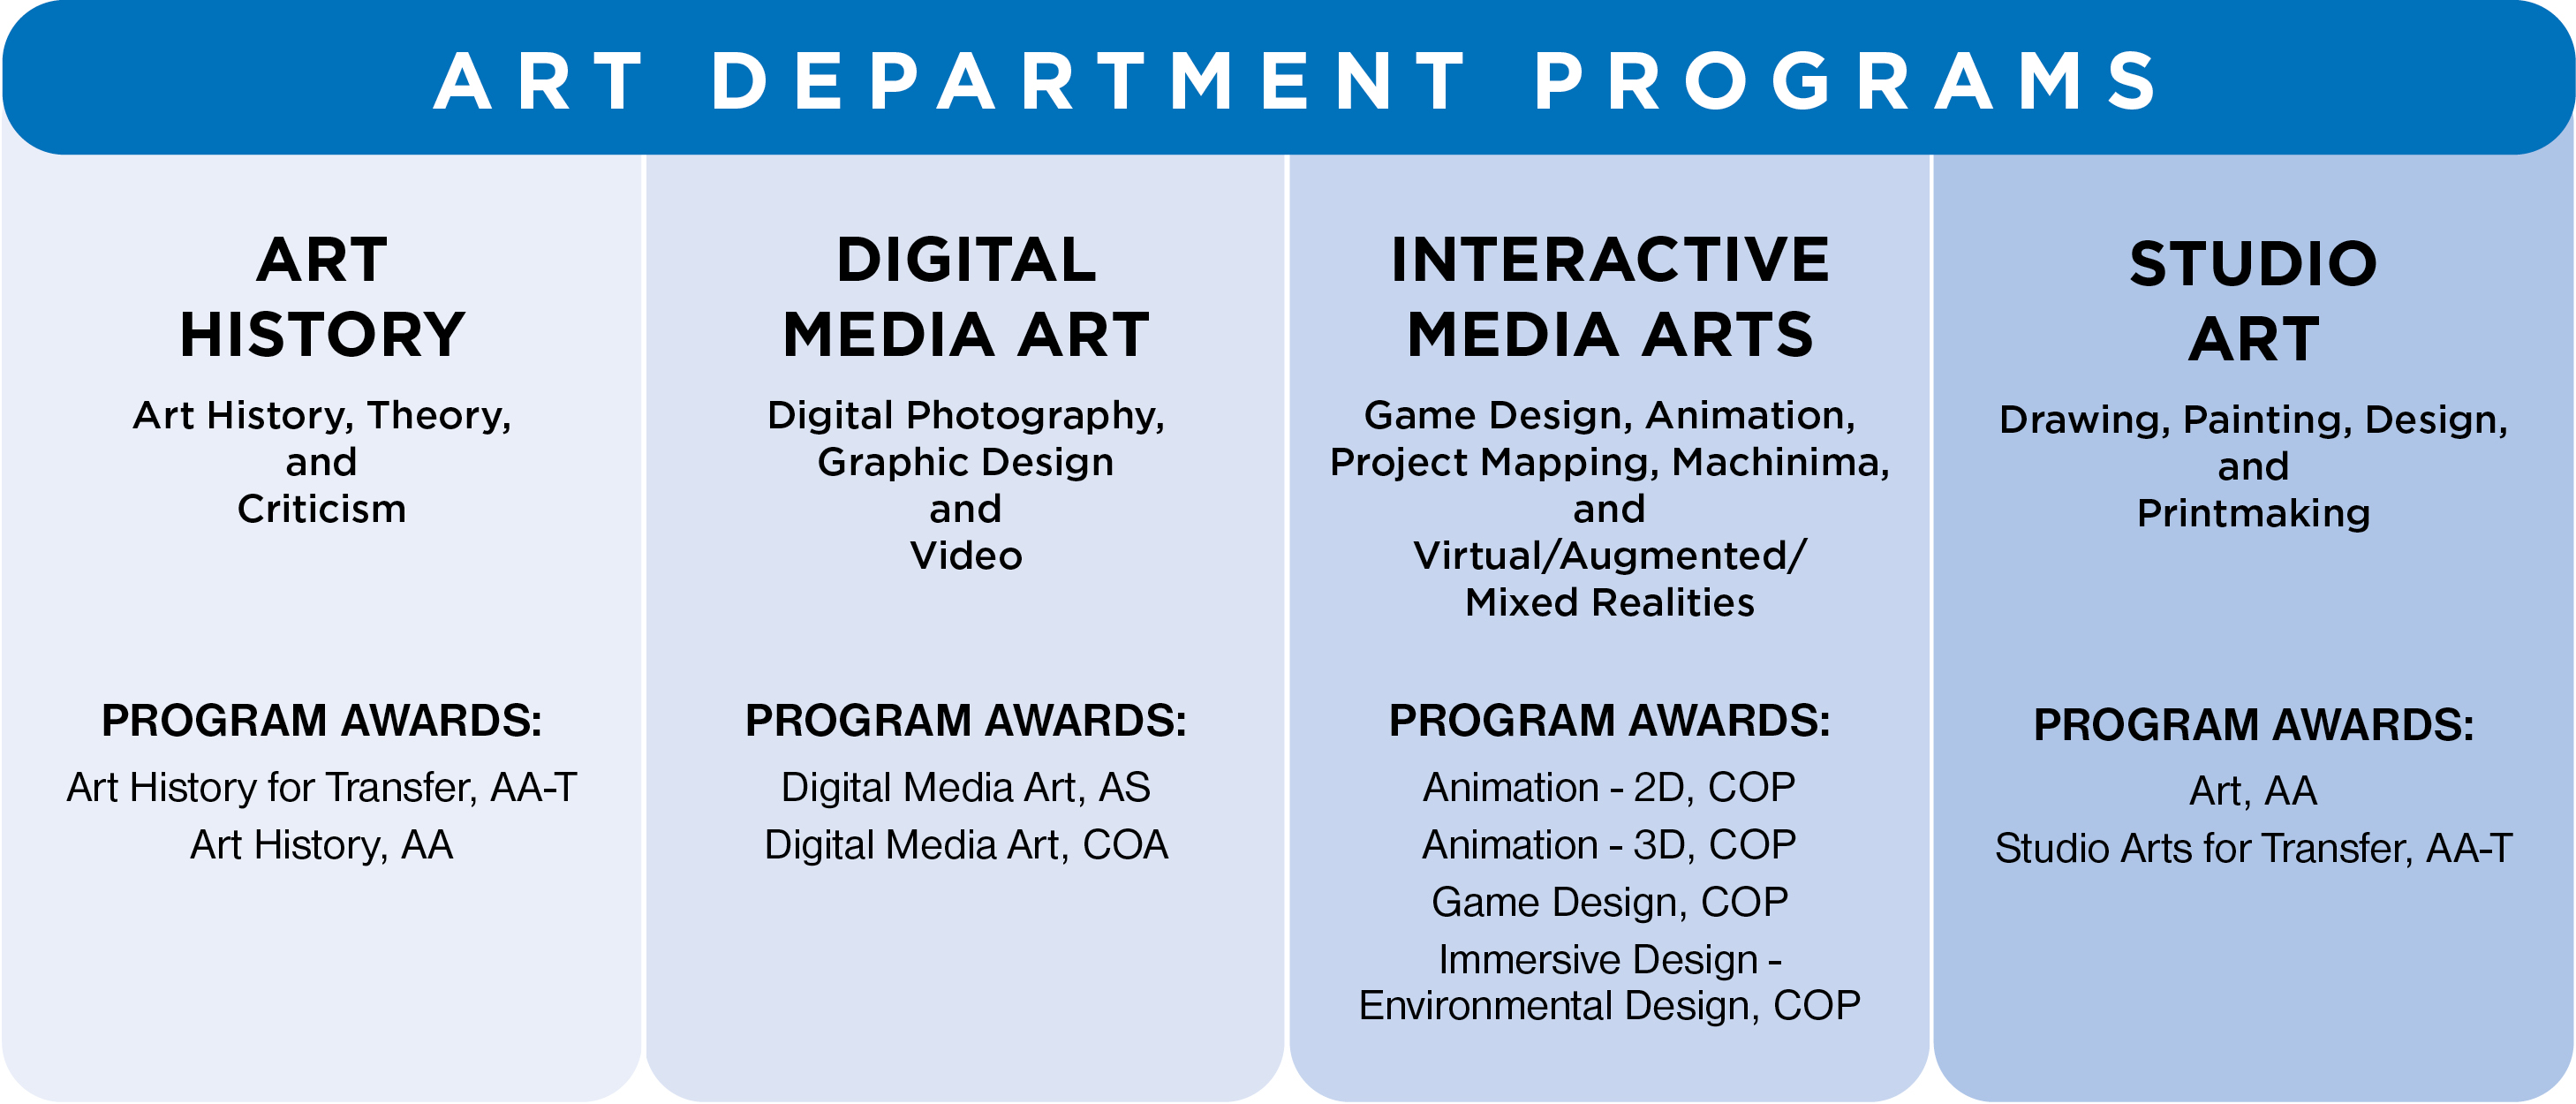 Graphical chart showing the programs and courses in the IVC art department. There are four categories: Art History, Digital Media Art, Interactive Media Arts, and Studio Art.